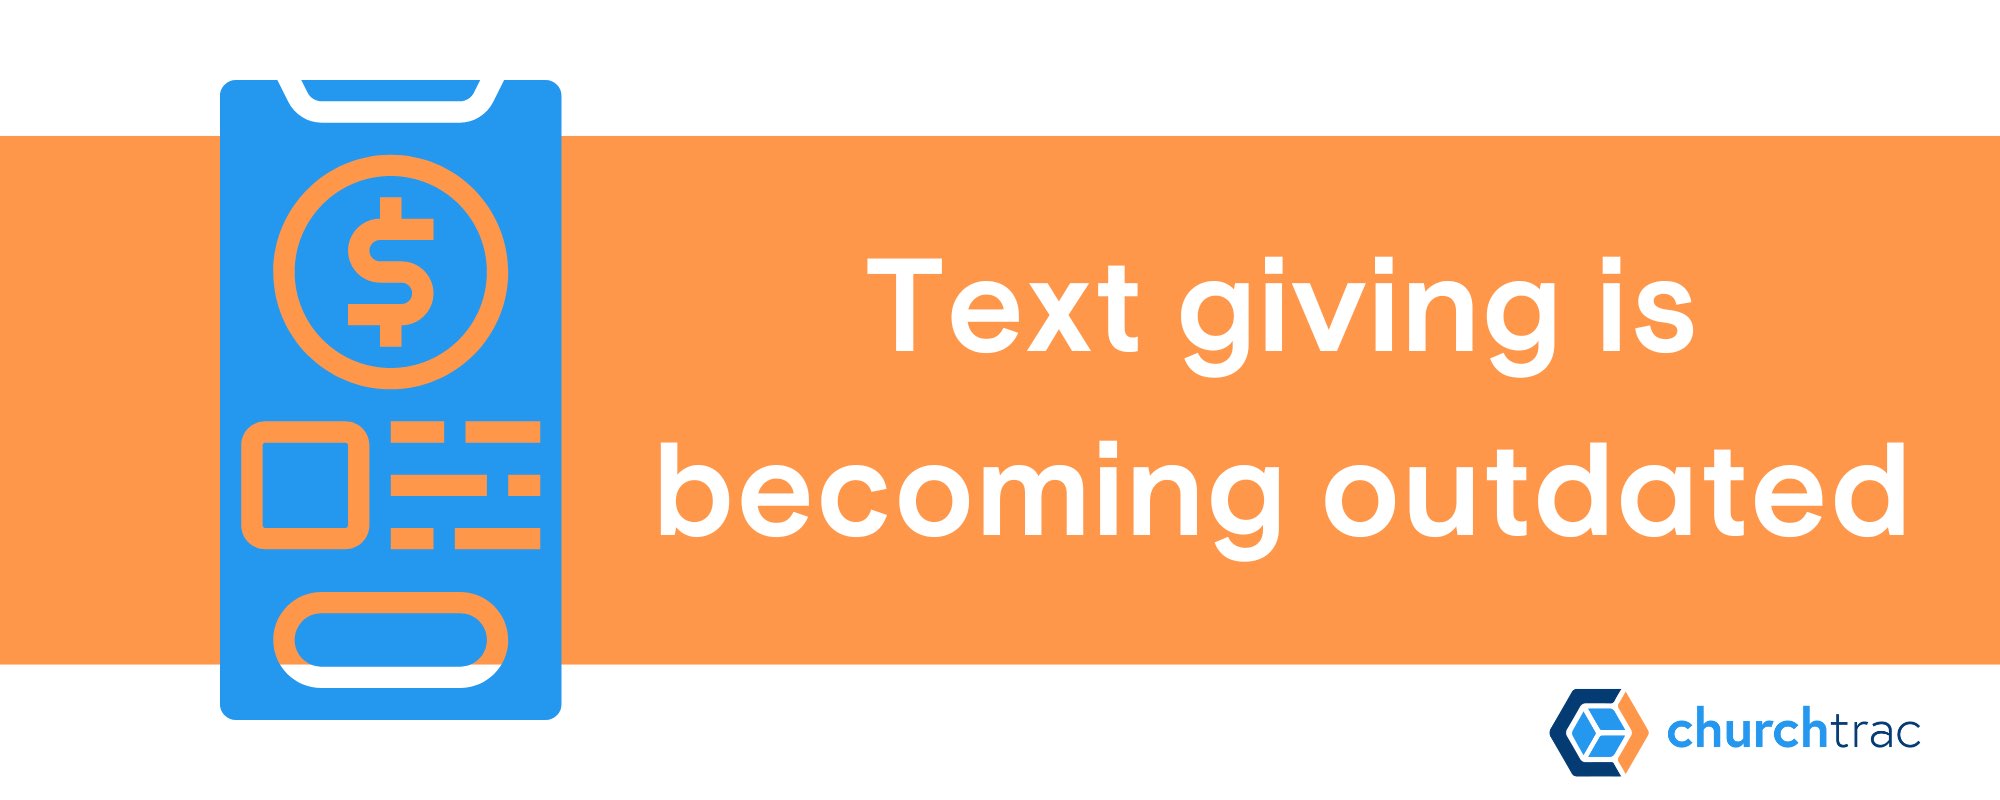 Text-to-give is an outdated form of fundraising